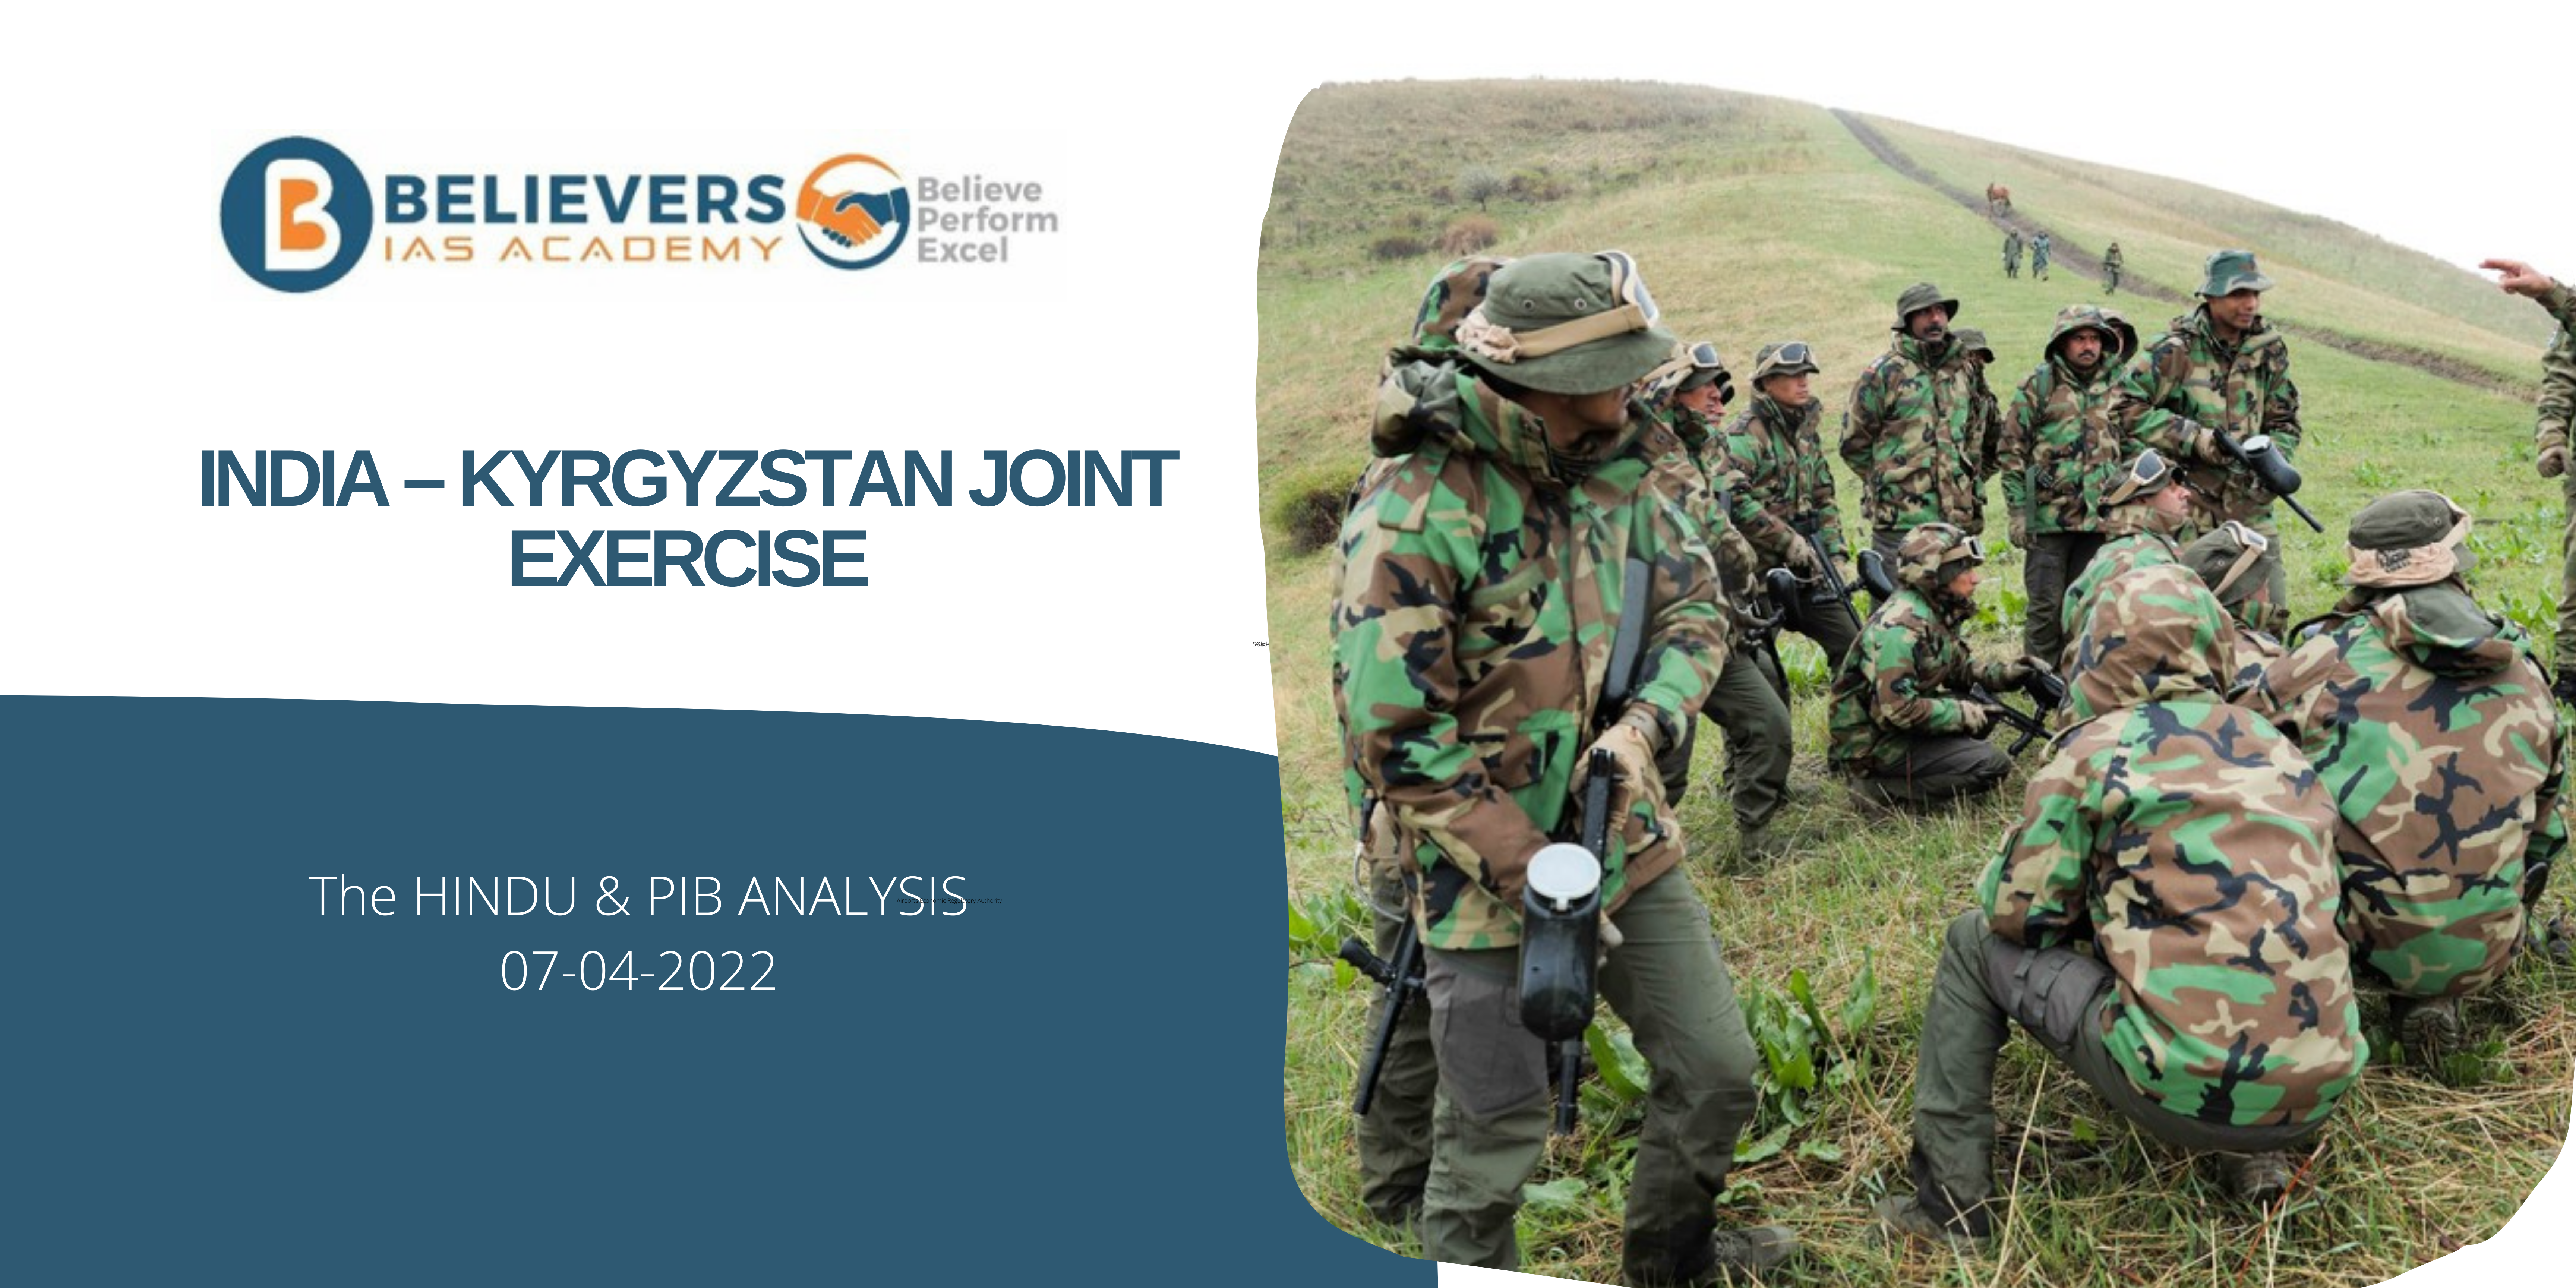 Civil services Current affairs - INDIA – KYRGYZSTAN JOINT EXERCISE